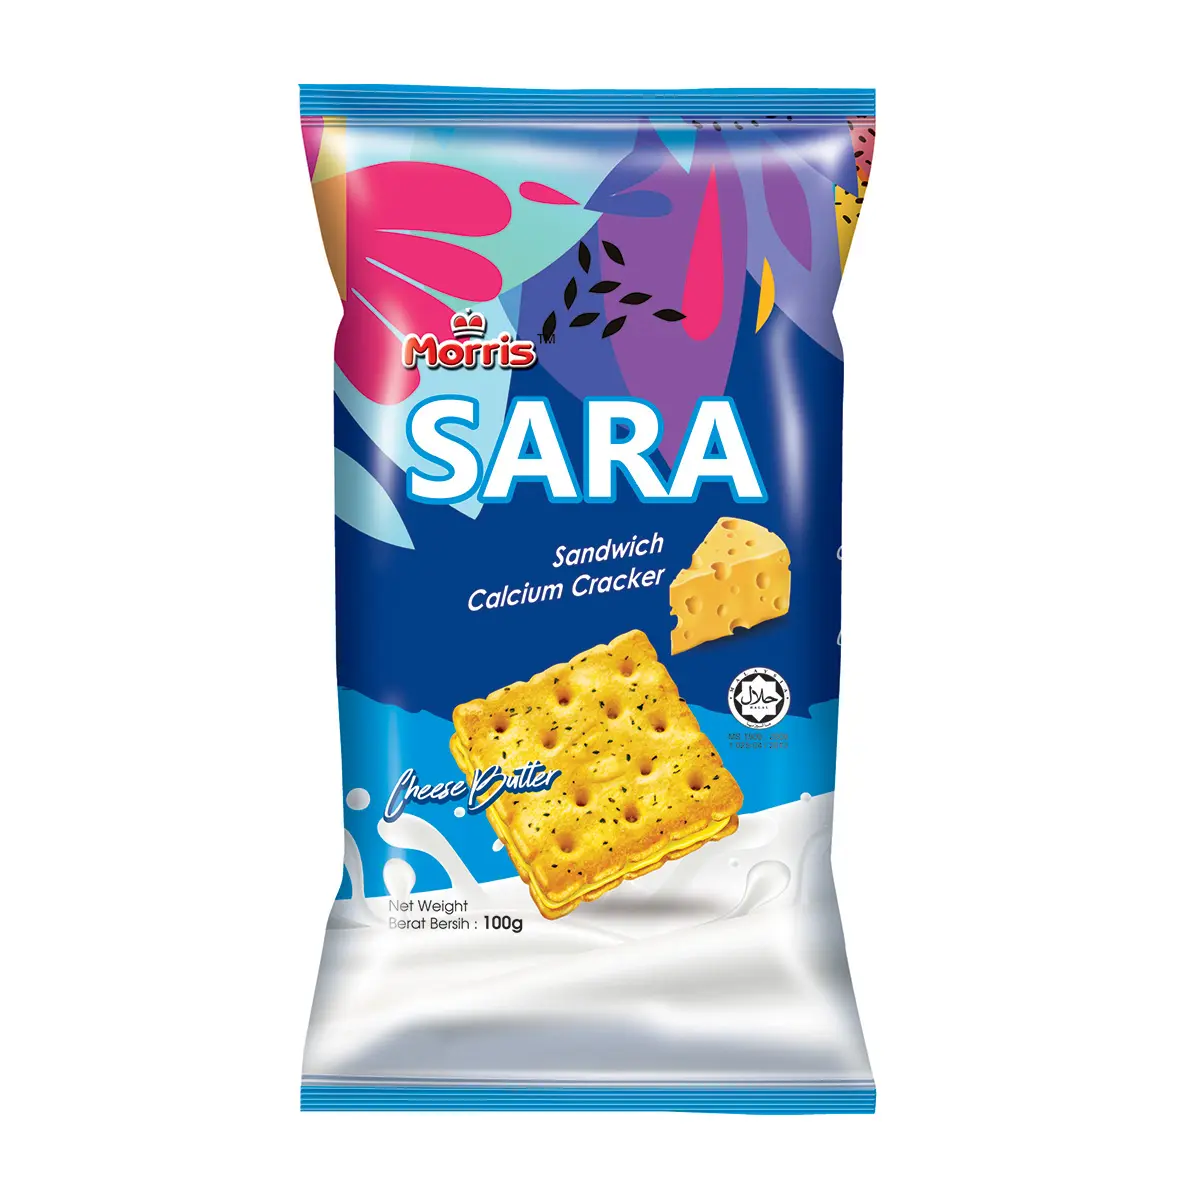 Authentic Grade Malaysia Healthy Sara Cheese Sandwich Biscuit Semi-hard Square Shape Biscuit Cracker With 18 Months Shelf Life